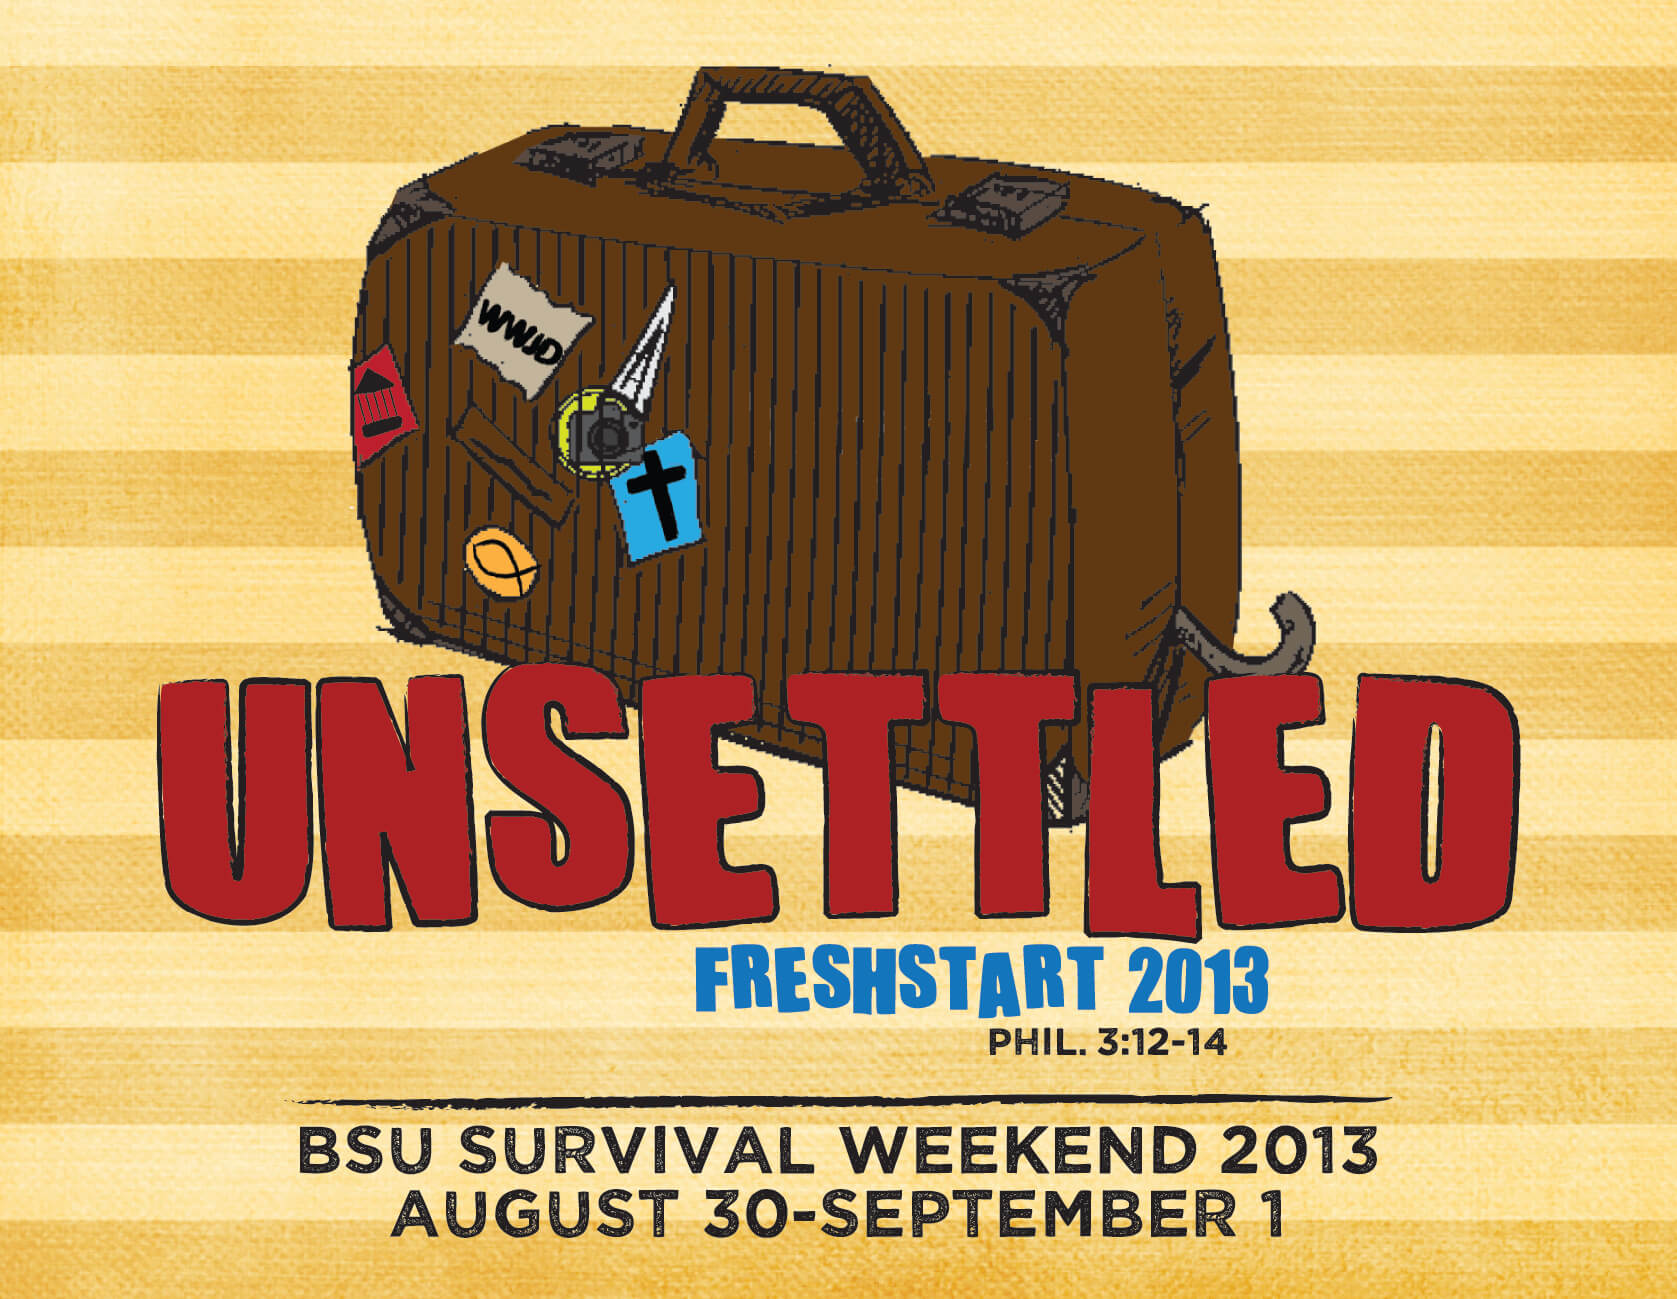 Unsettled branding for Ole Miss BSU